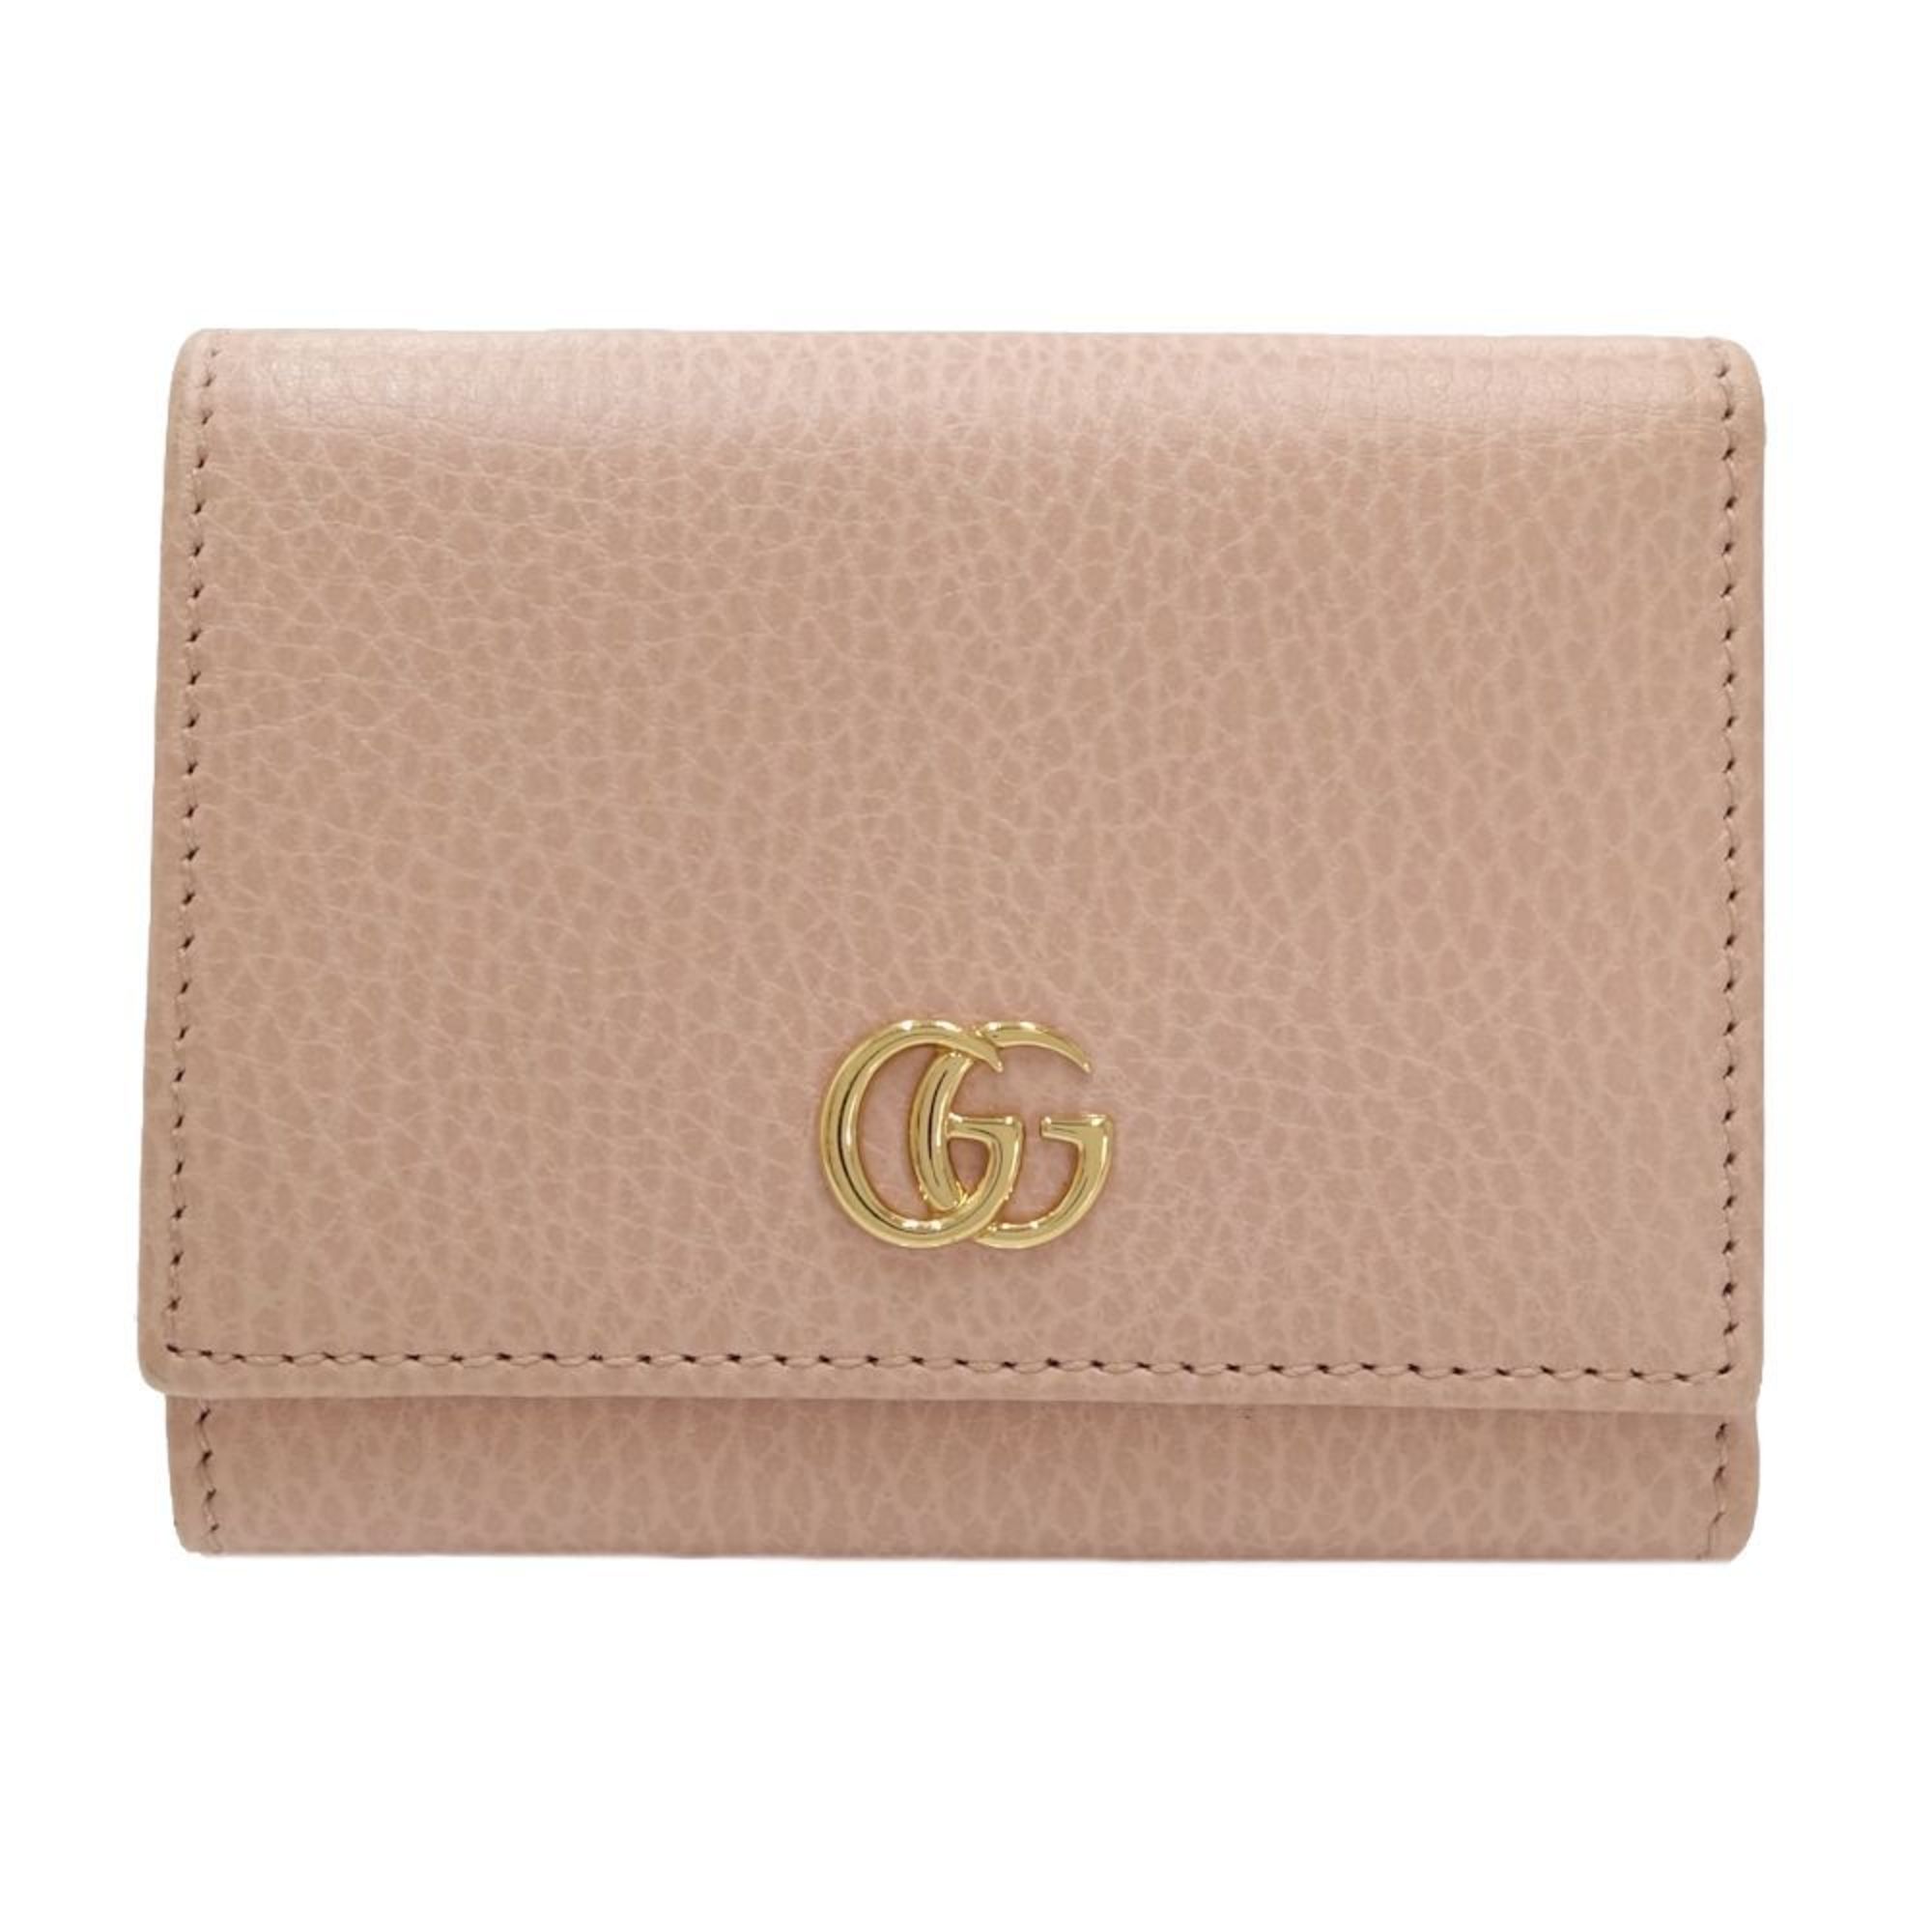 Tri-fold Wallet 474746 W Petit Marmont Leather Pink 180400